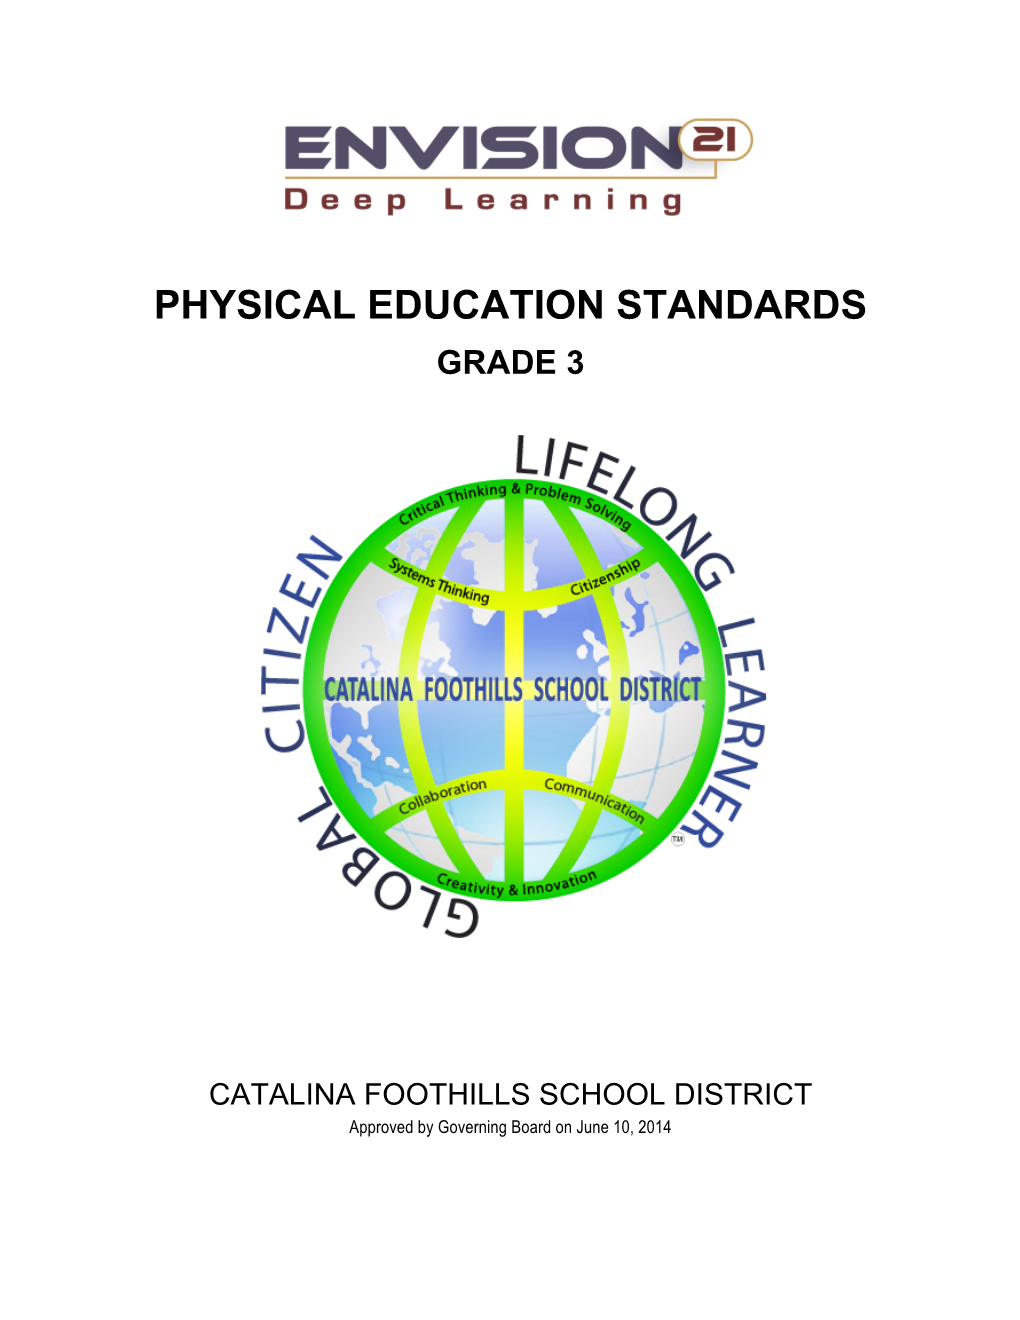 Physical Education Standards